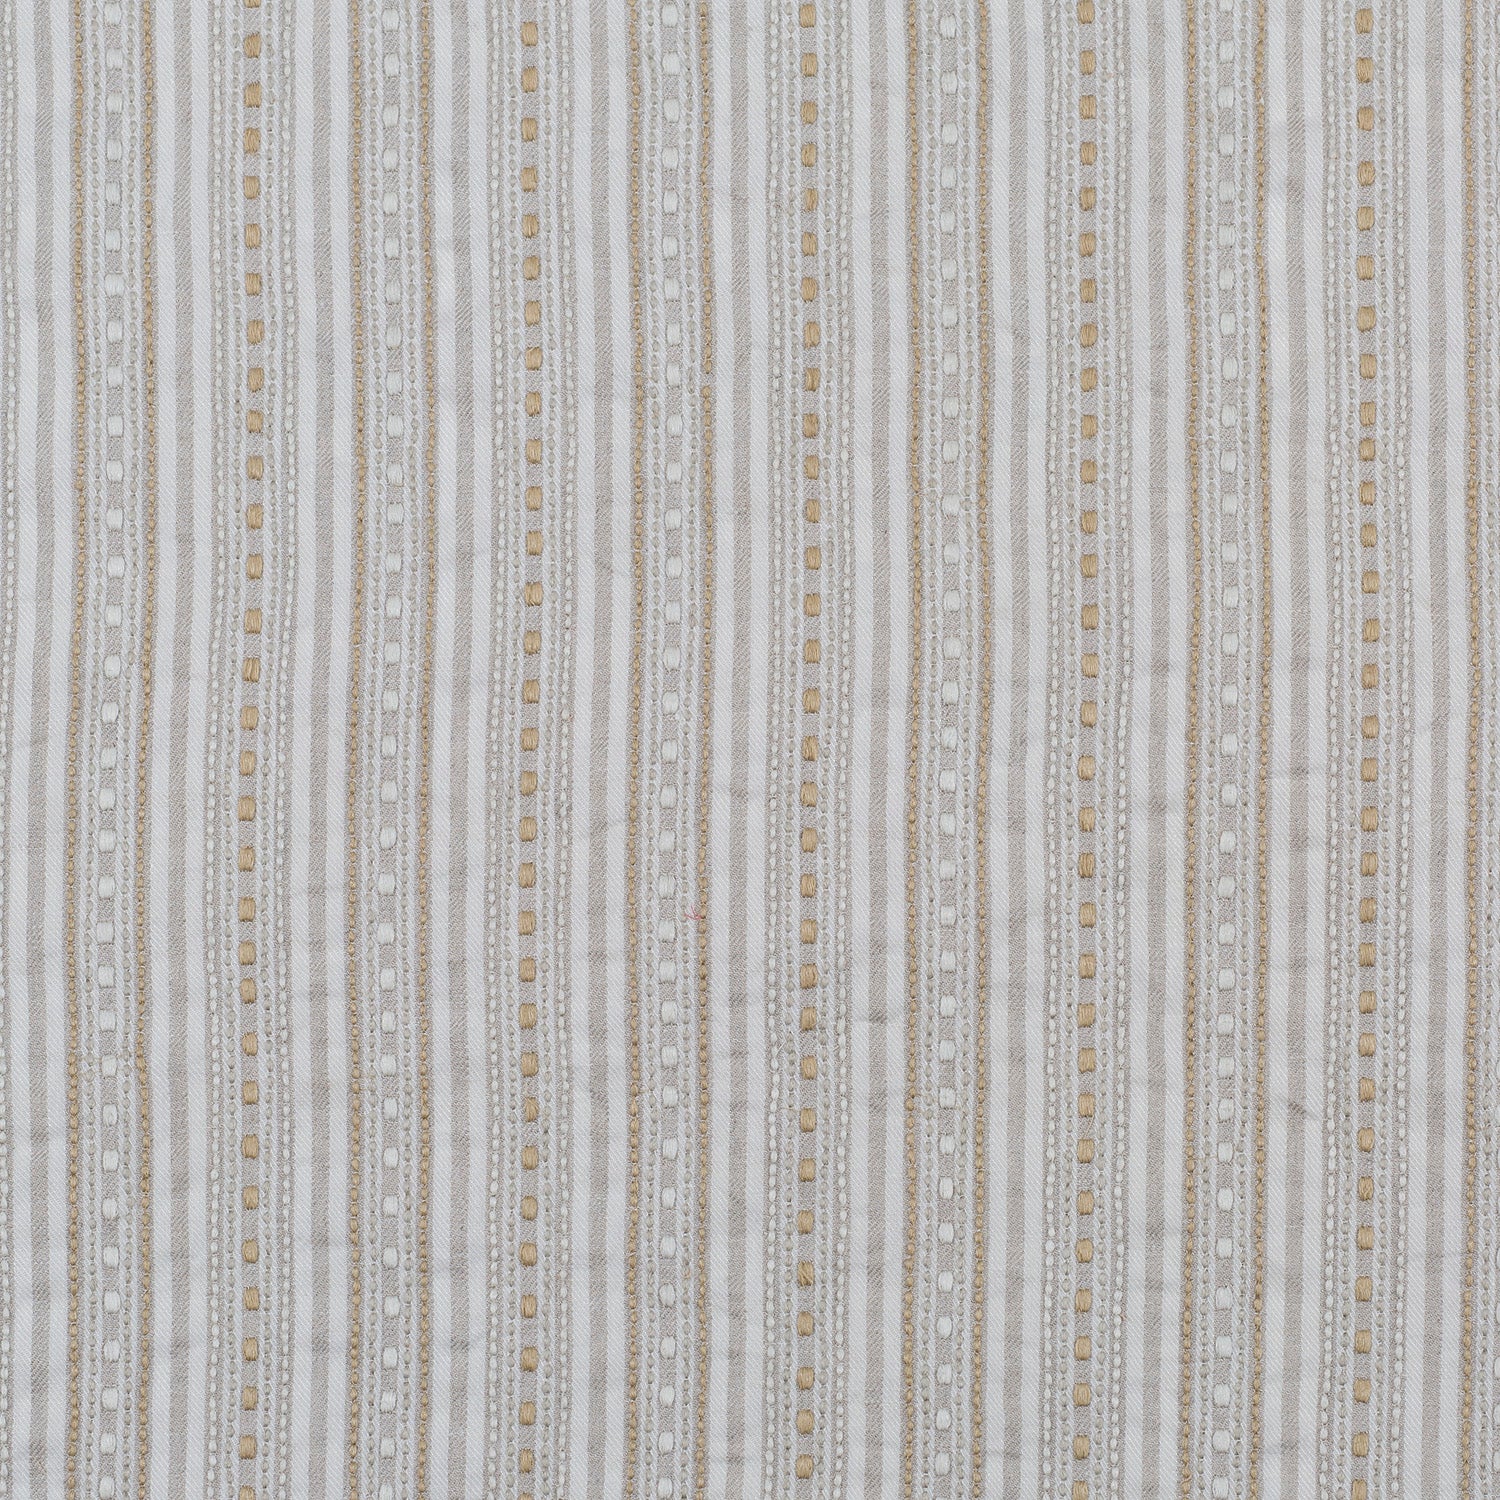 Dimensional embroidered fabric in an irregular stripe pattern in shades of gray, white and cream.